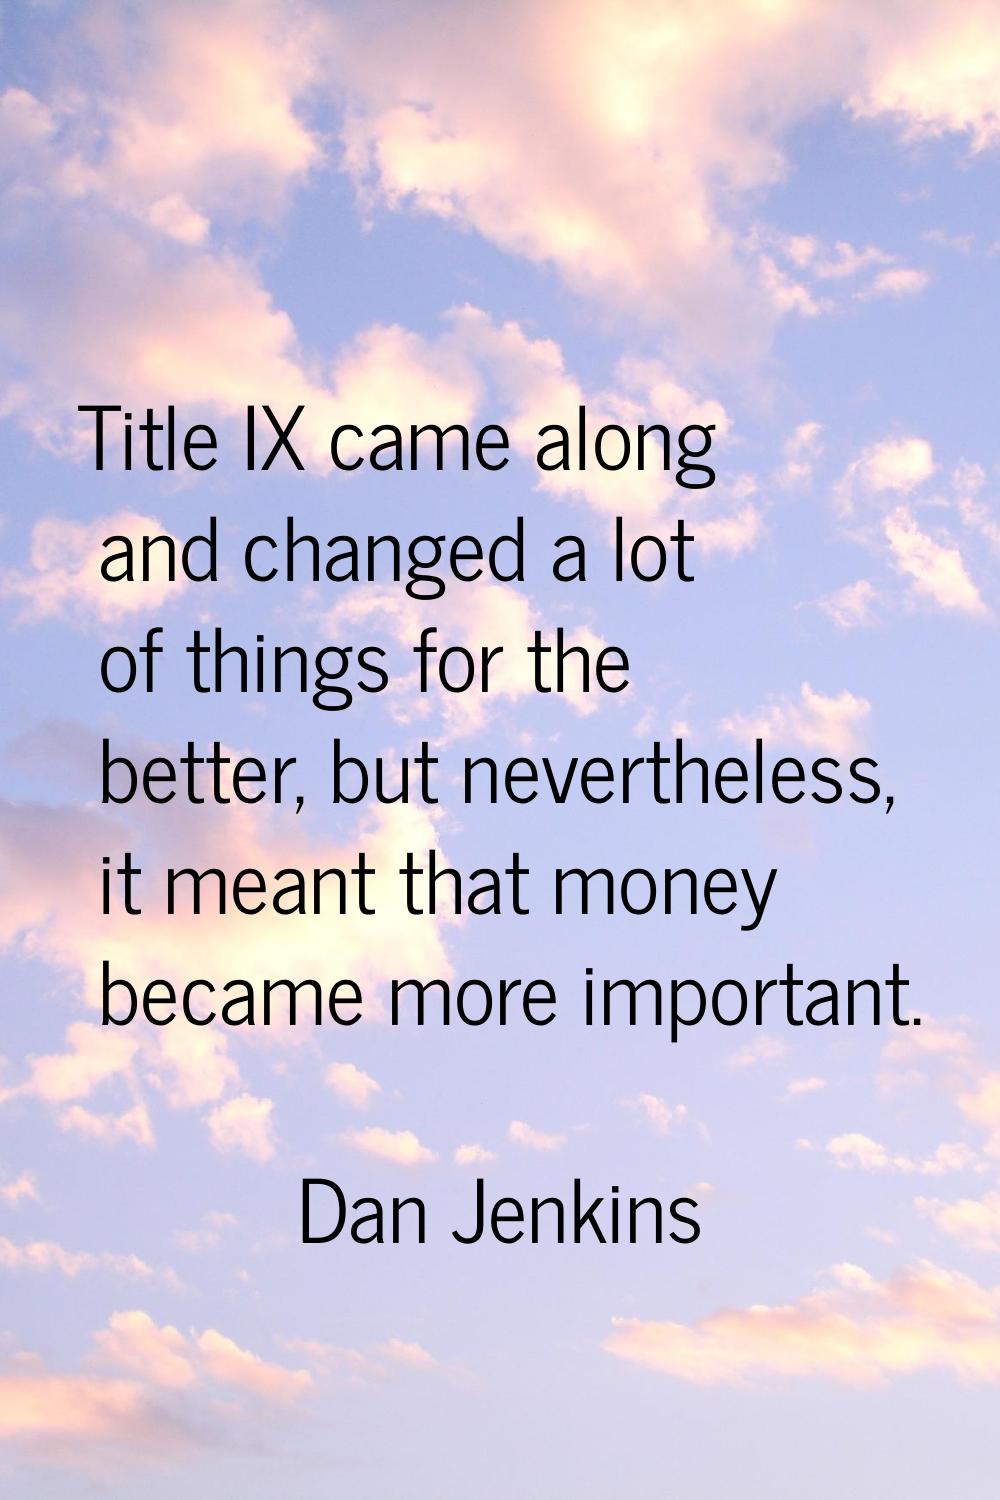 Title IX came along and changed a lot of things for the better, but nevertheless, it meant that mon